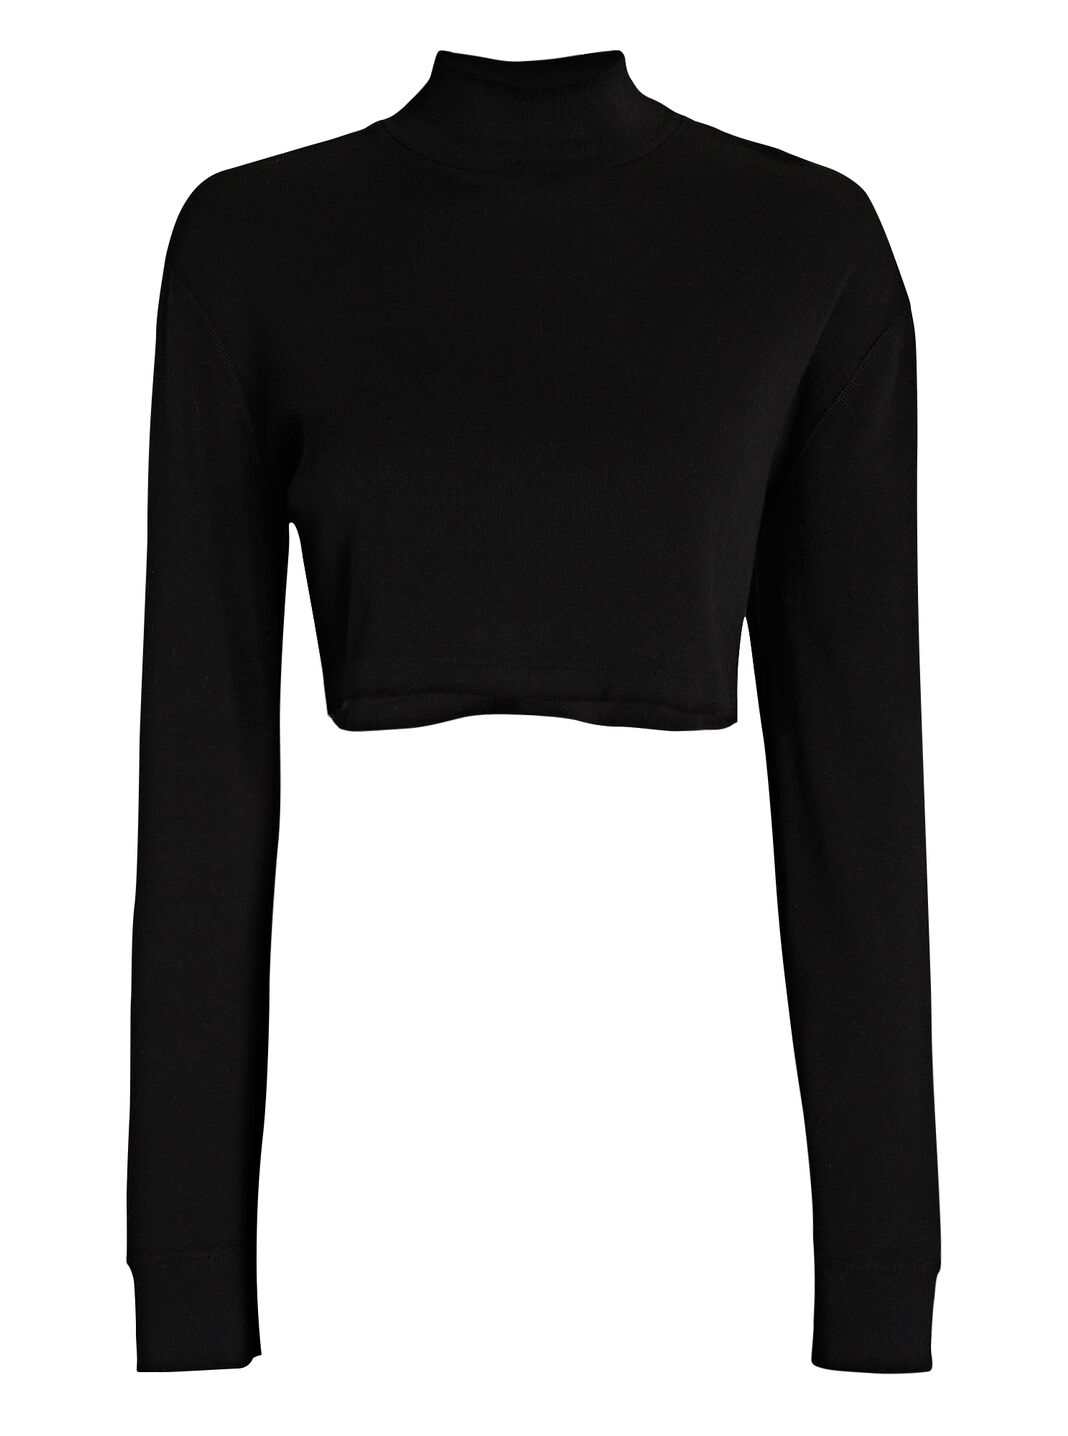 Cropped Mock Neck Cotton Sweater